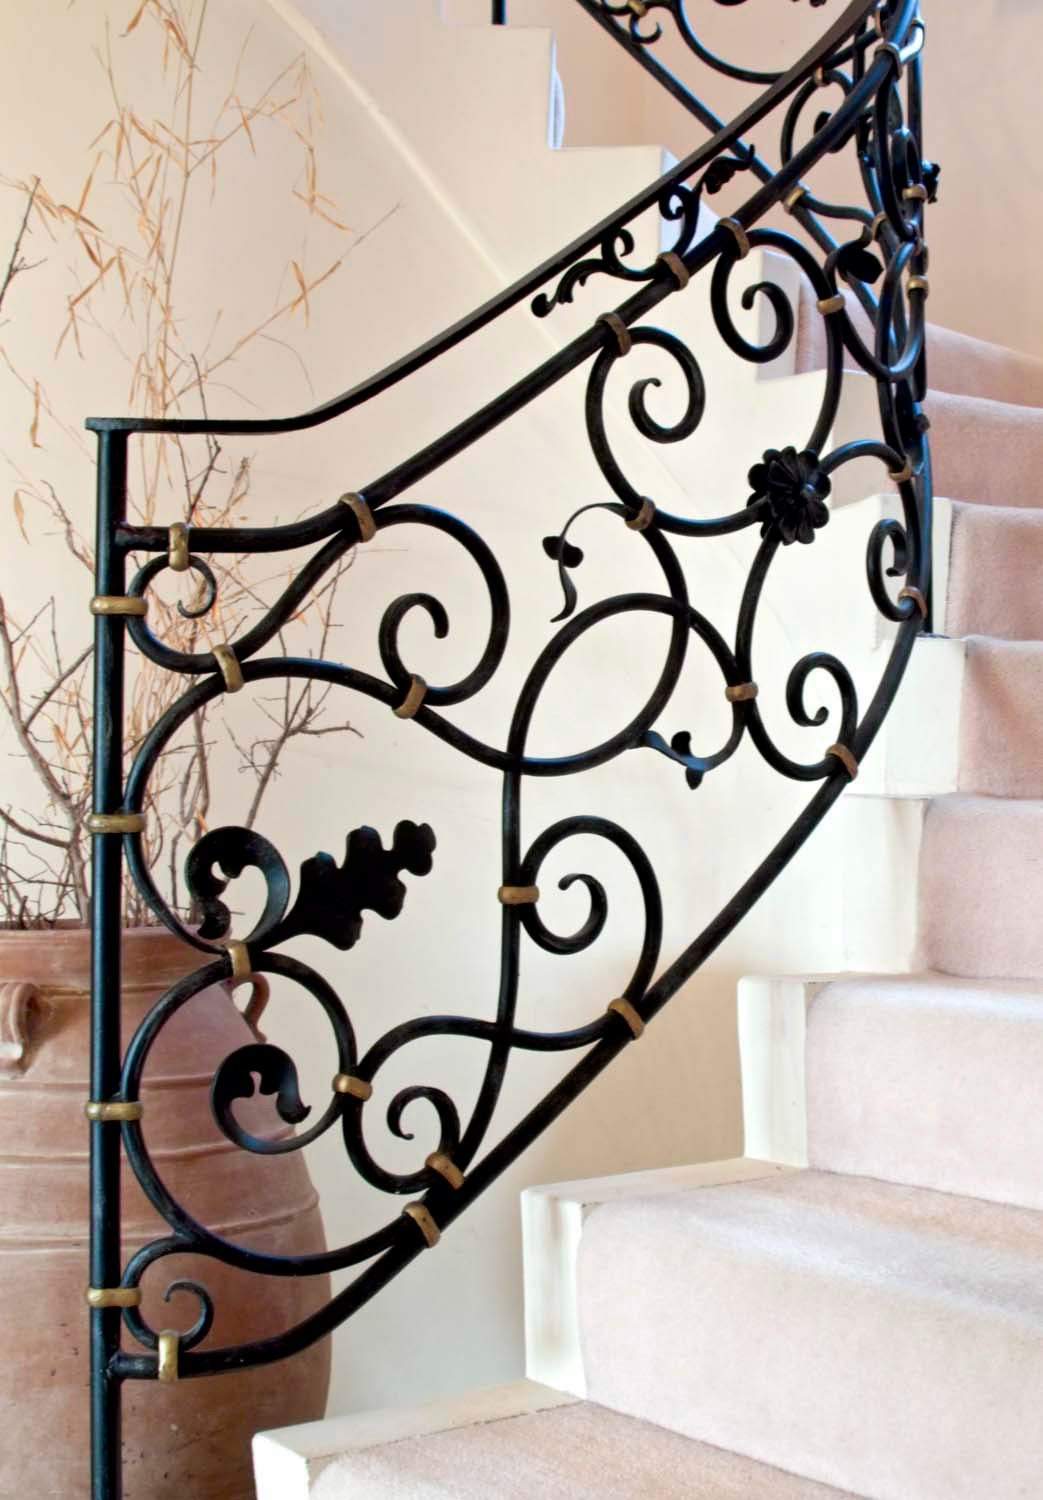 7 Wrought iron stairway banister design and manufacture in french or classical style